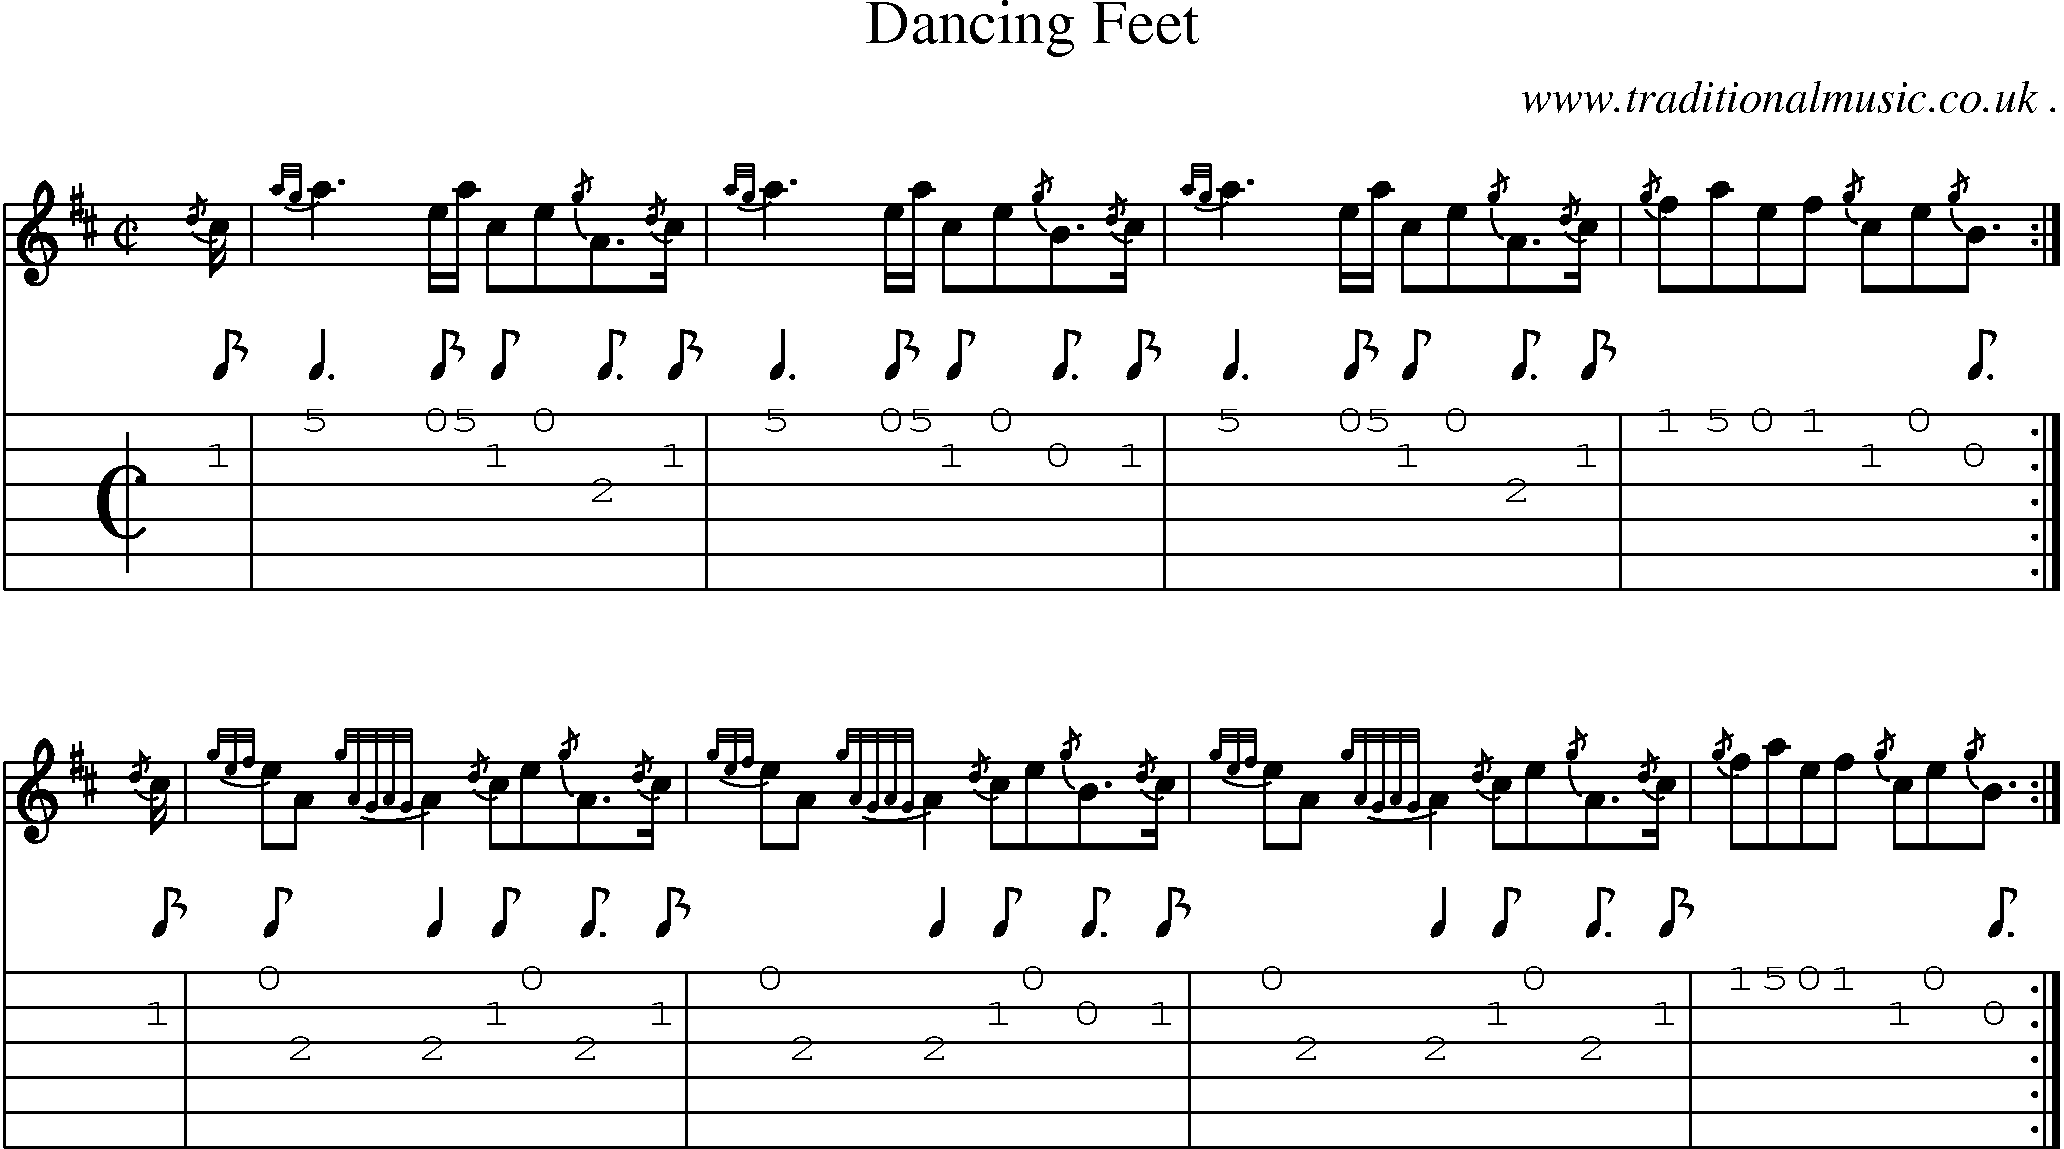 Sheet-music  score, Chords and Guitar Tabs for Dancing Feet